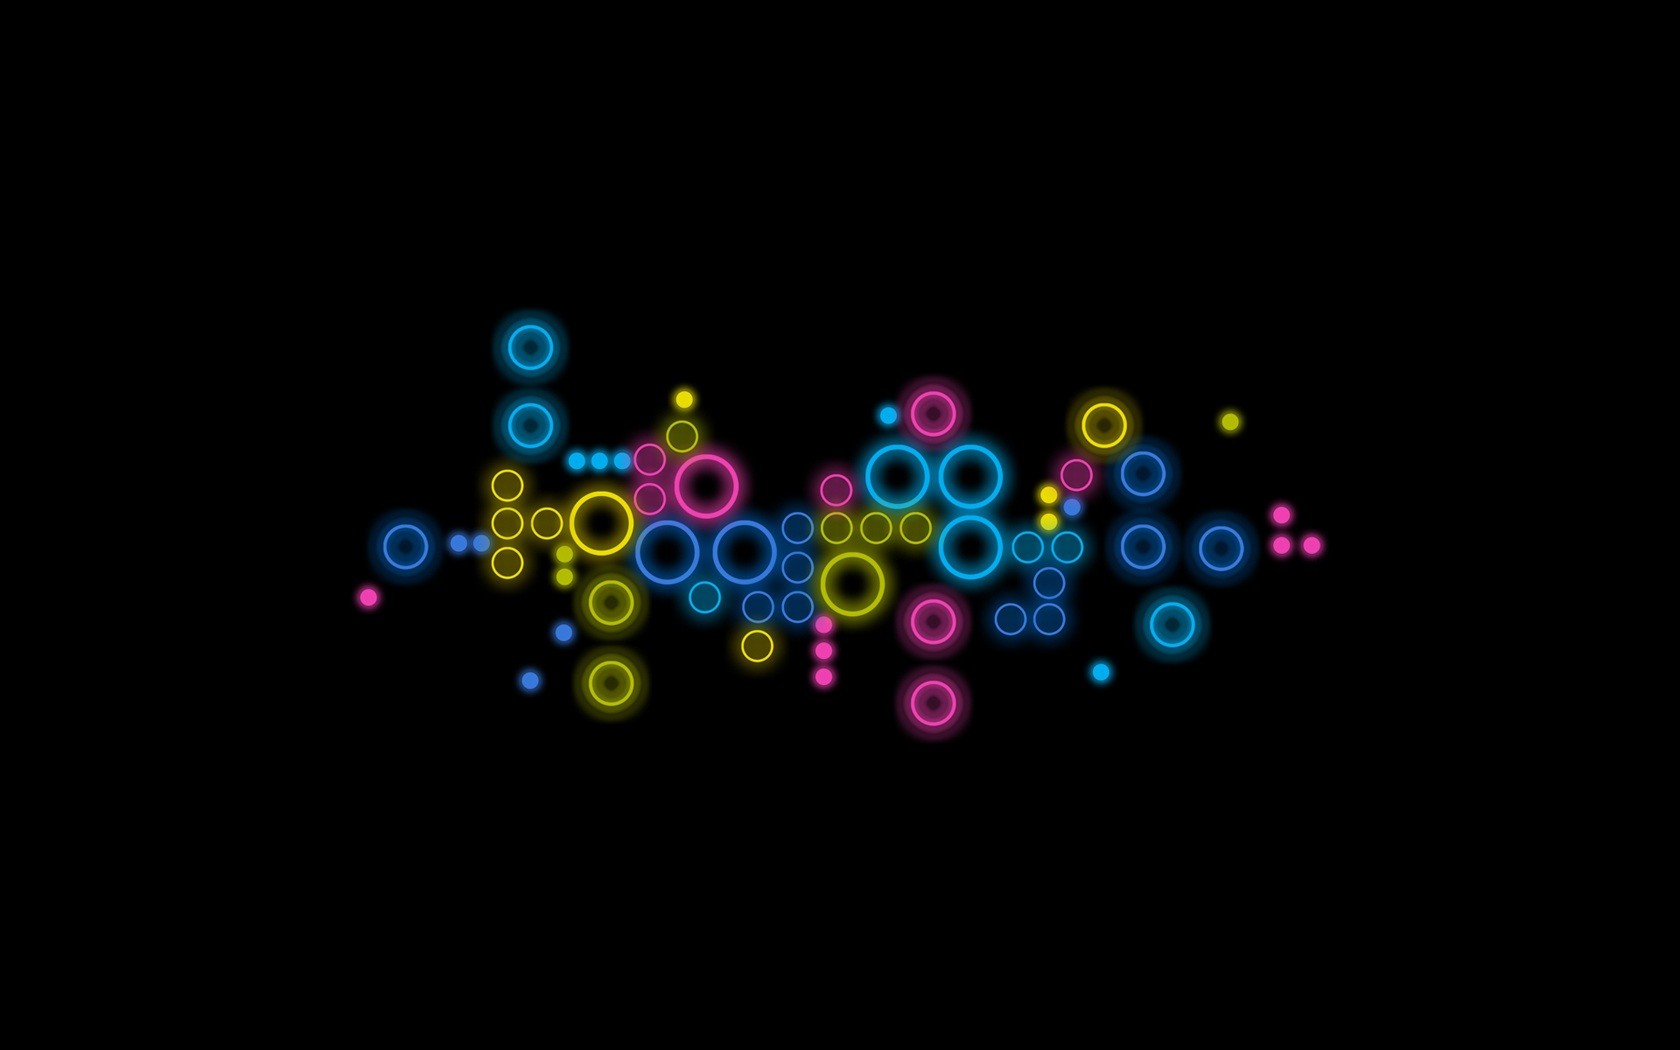 General 1680x1050 digital art minimalism colorful circle abstract simple background black background yellow blue pink